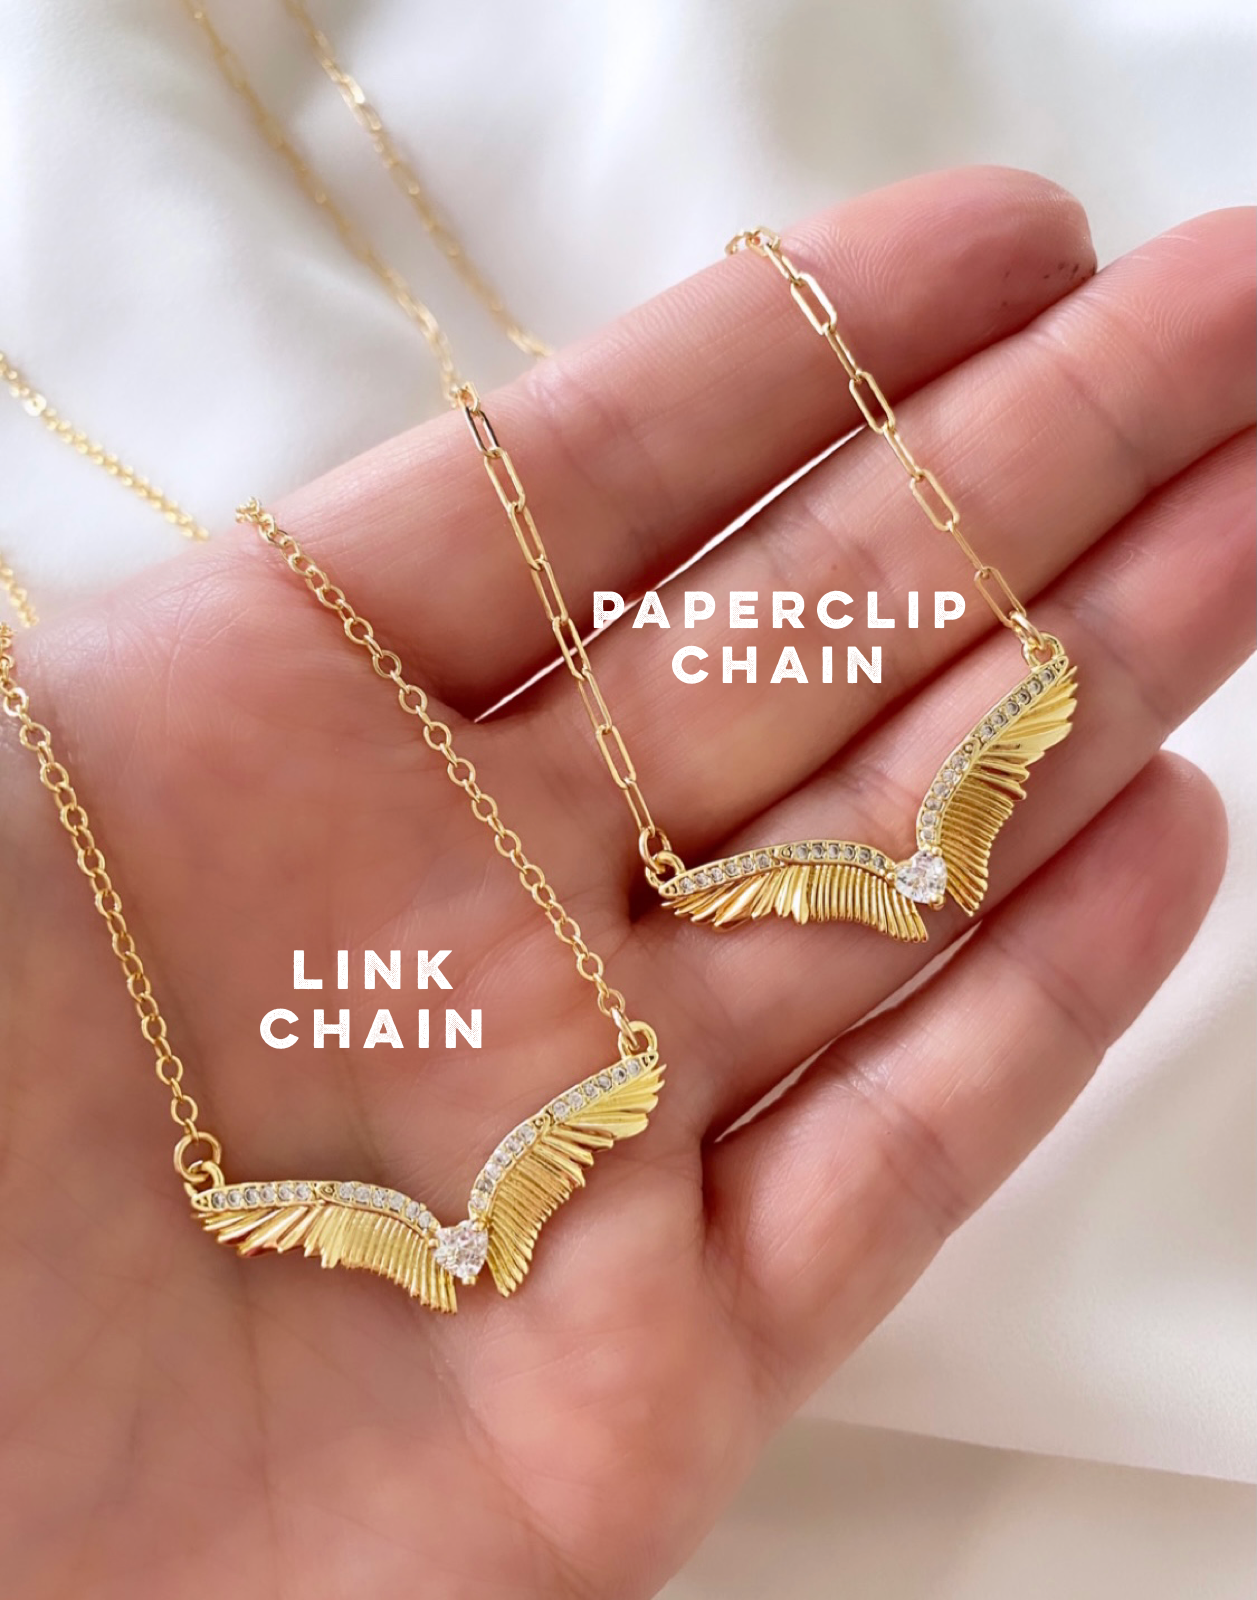 Gold Filled Angel Wings Necklace - Pave Necklace